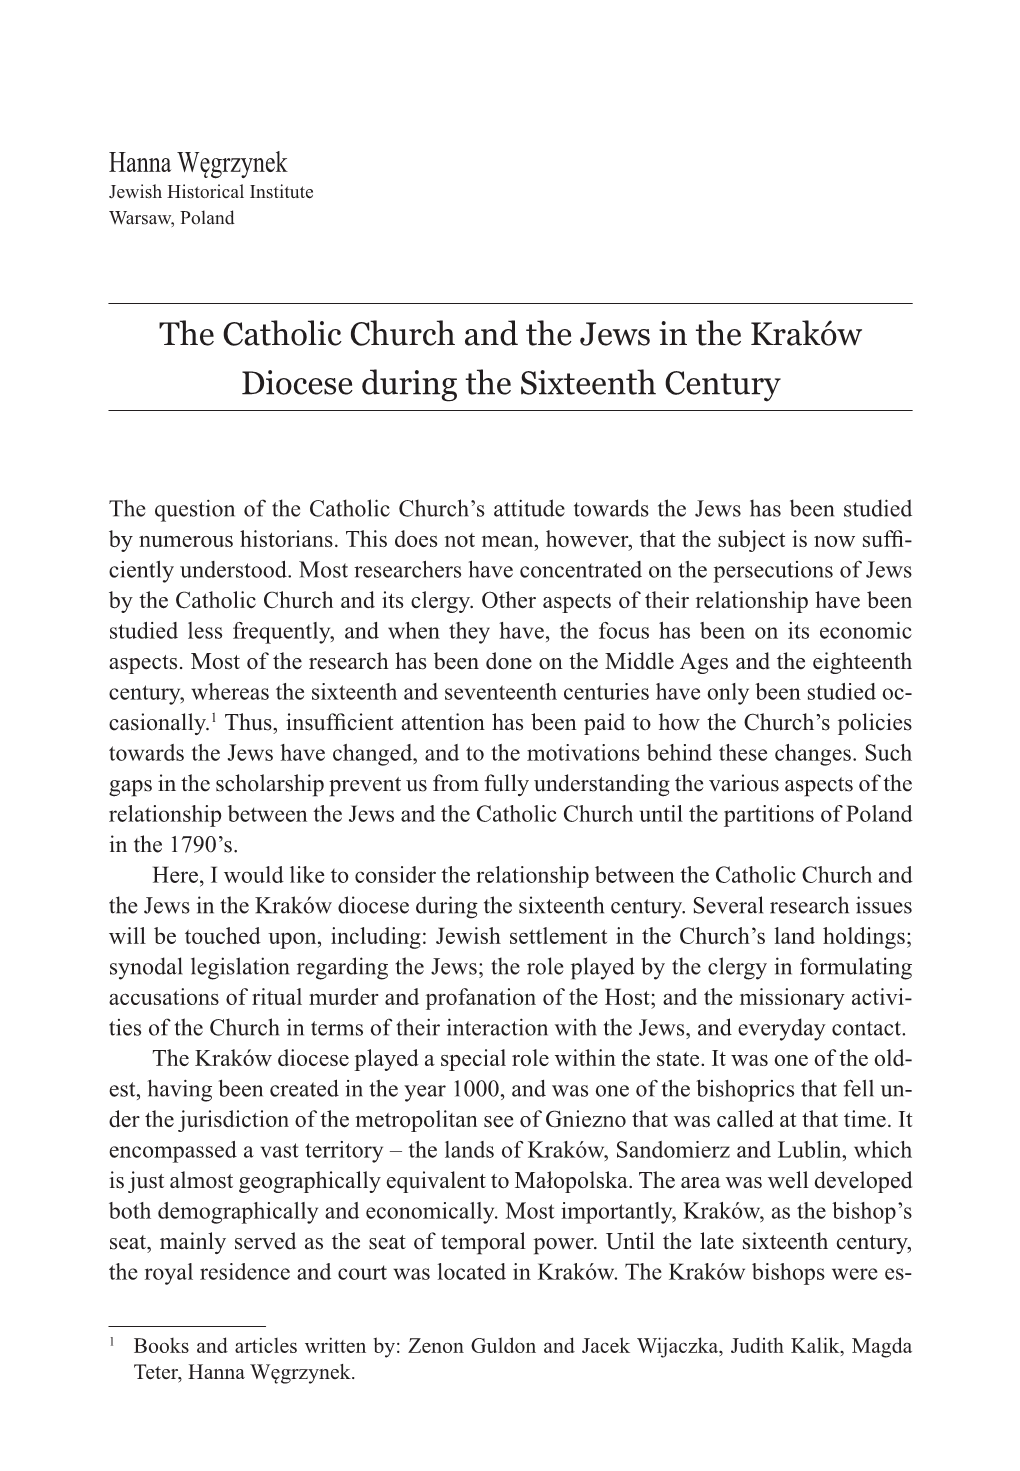 The Catholic Church and the Jews in the Kraków Diocese During the Sixteenth Century